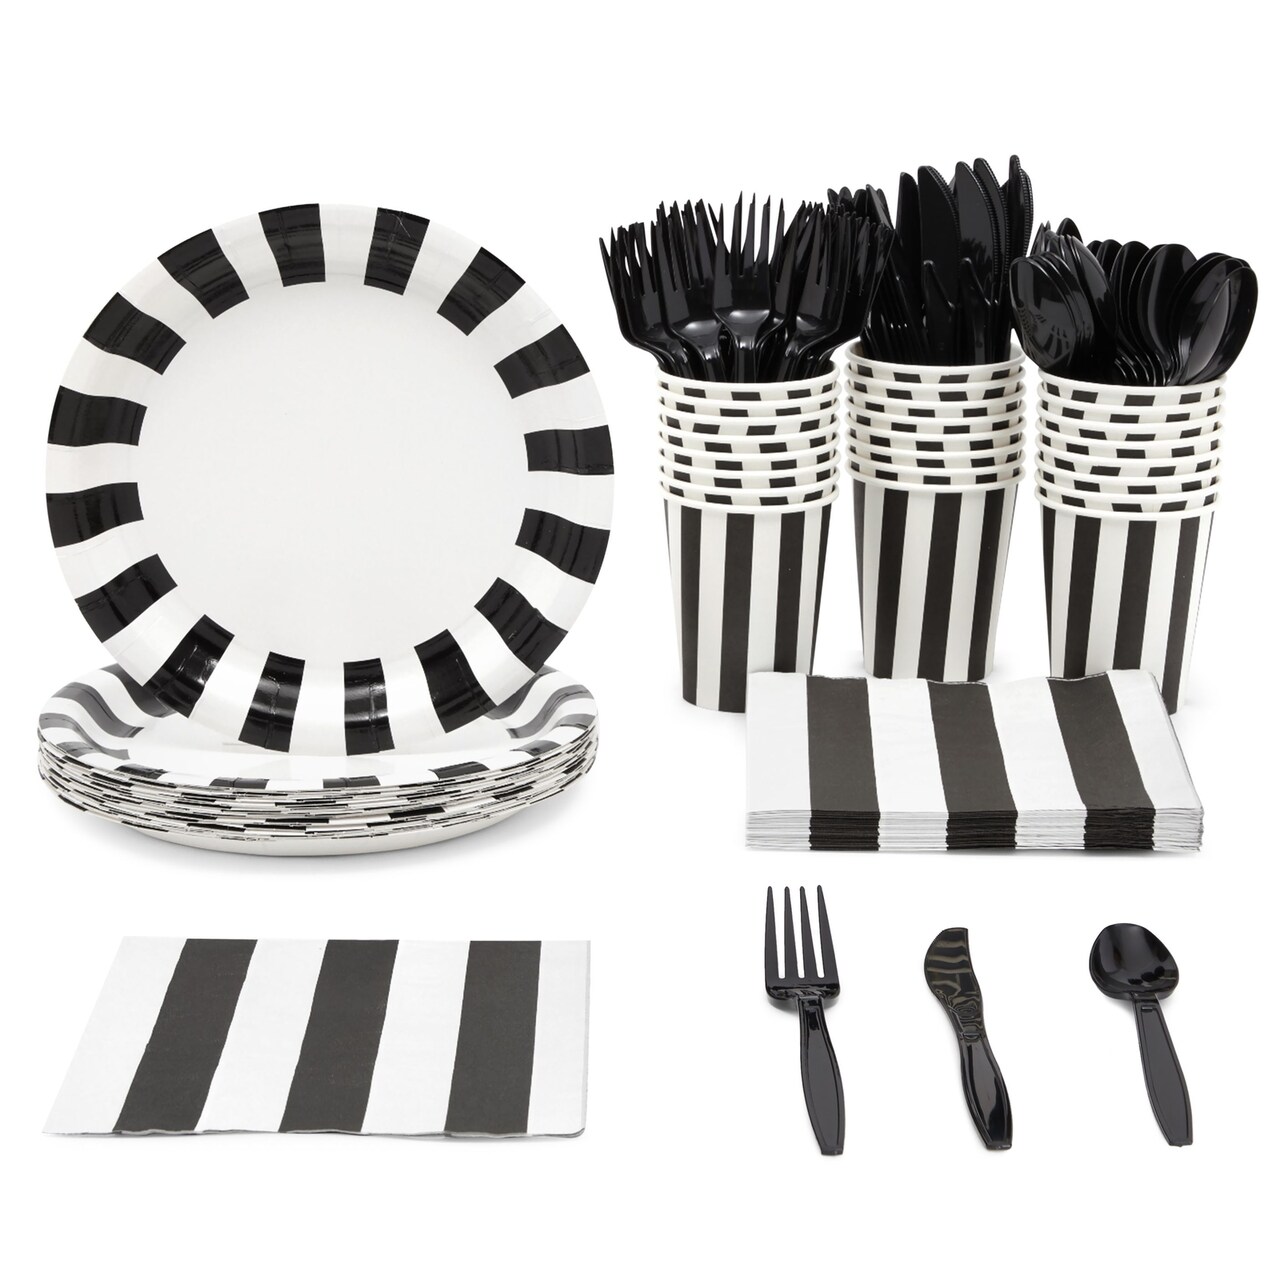 144 Piece Black and White Party Decorations - Serves 24 Striped